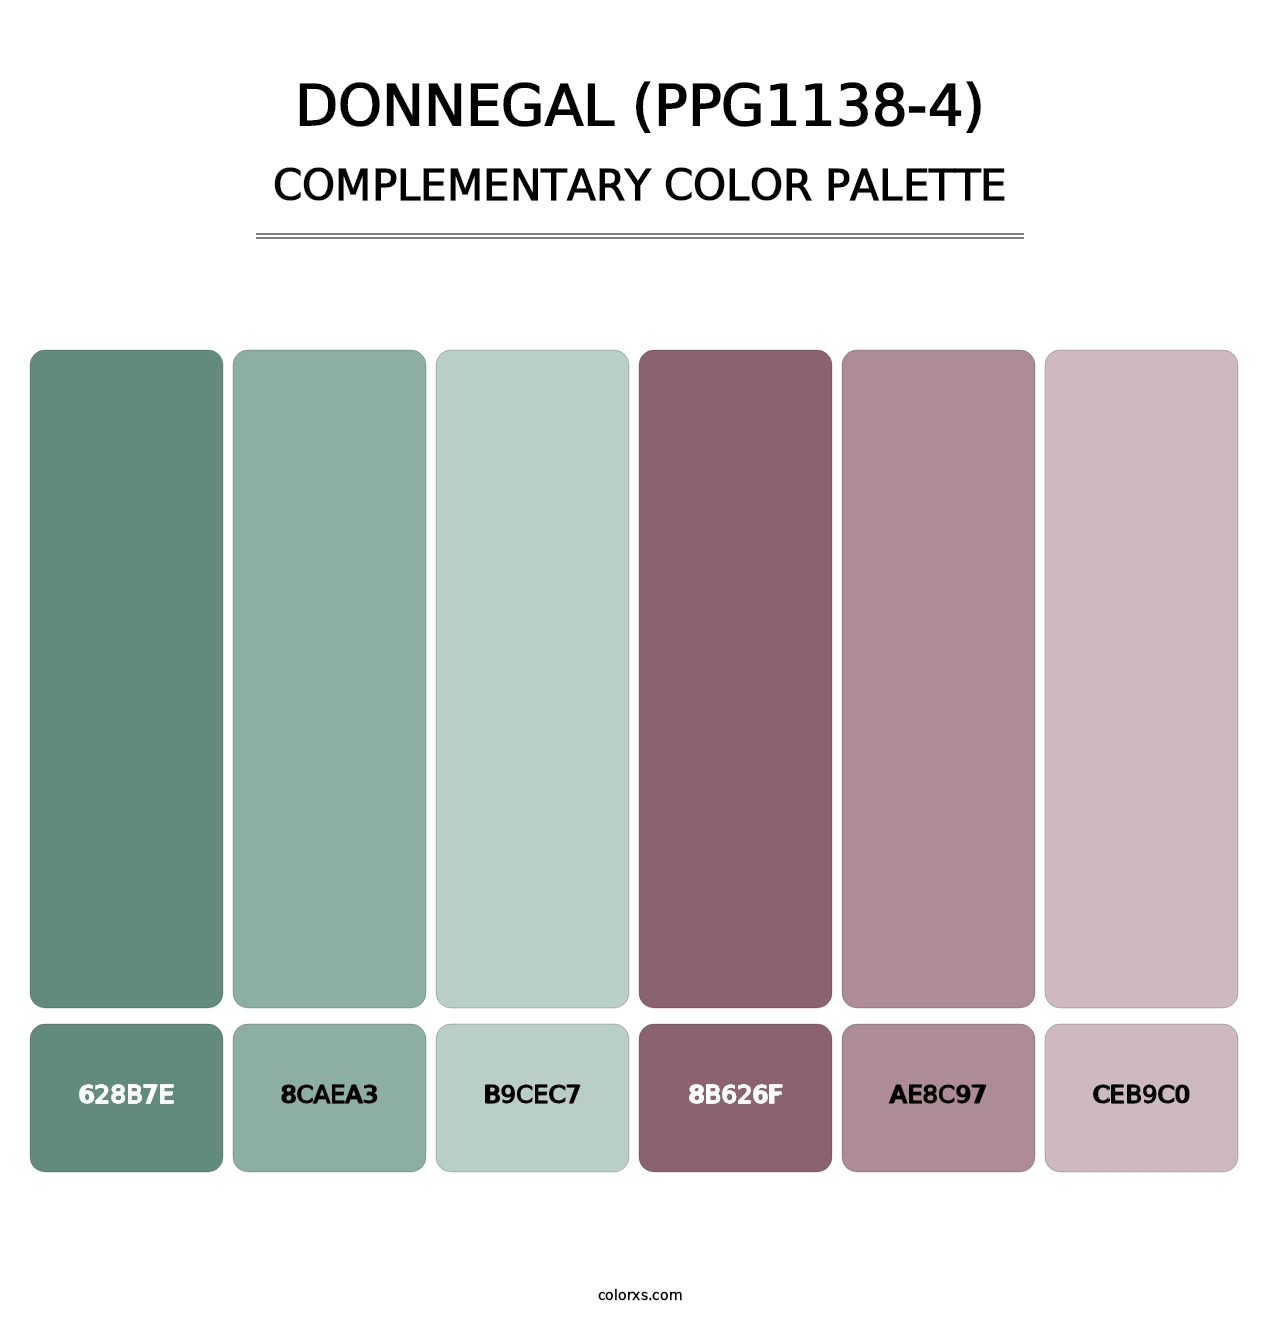 Donnegal (PPG1138-4) - Complementary Color Palette